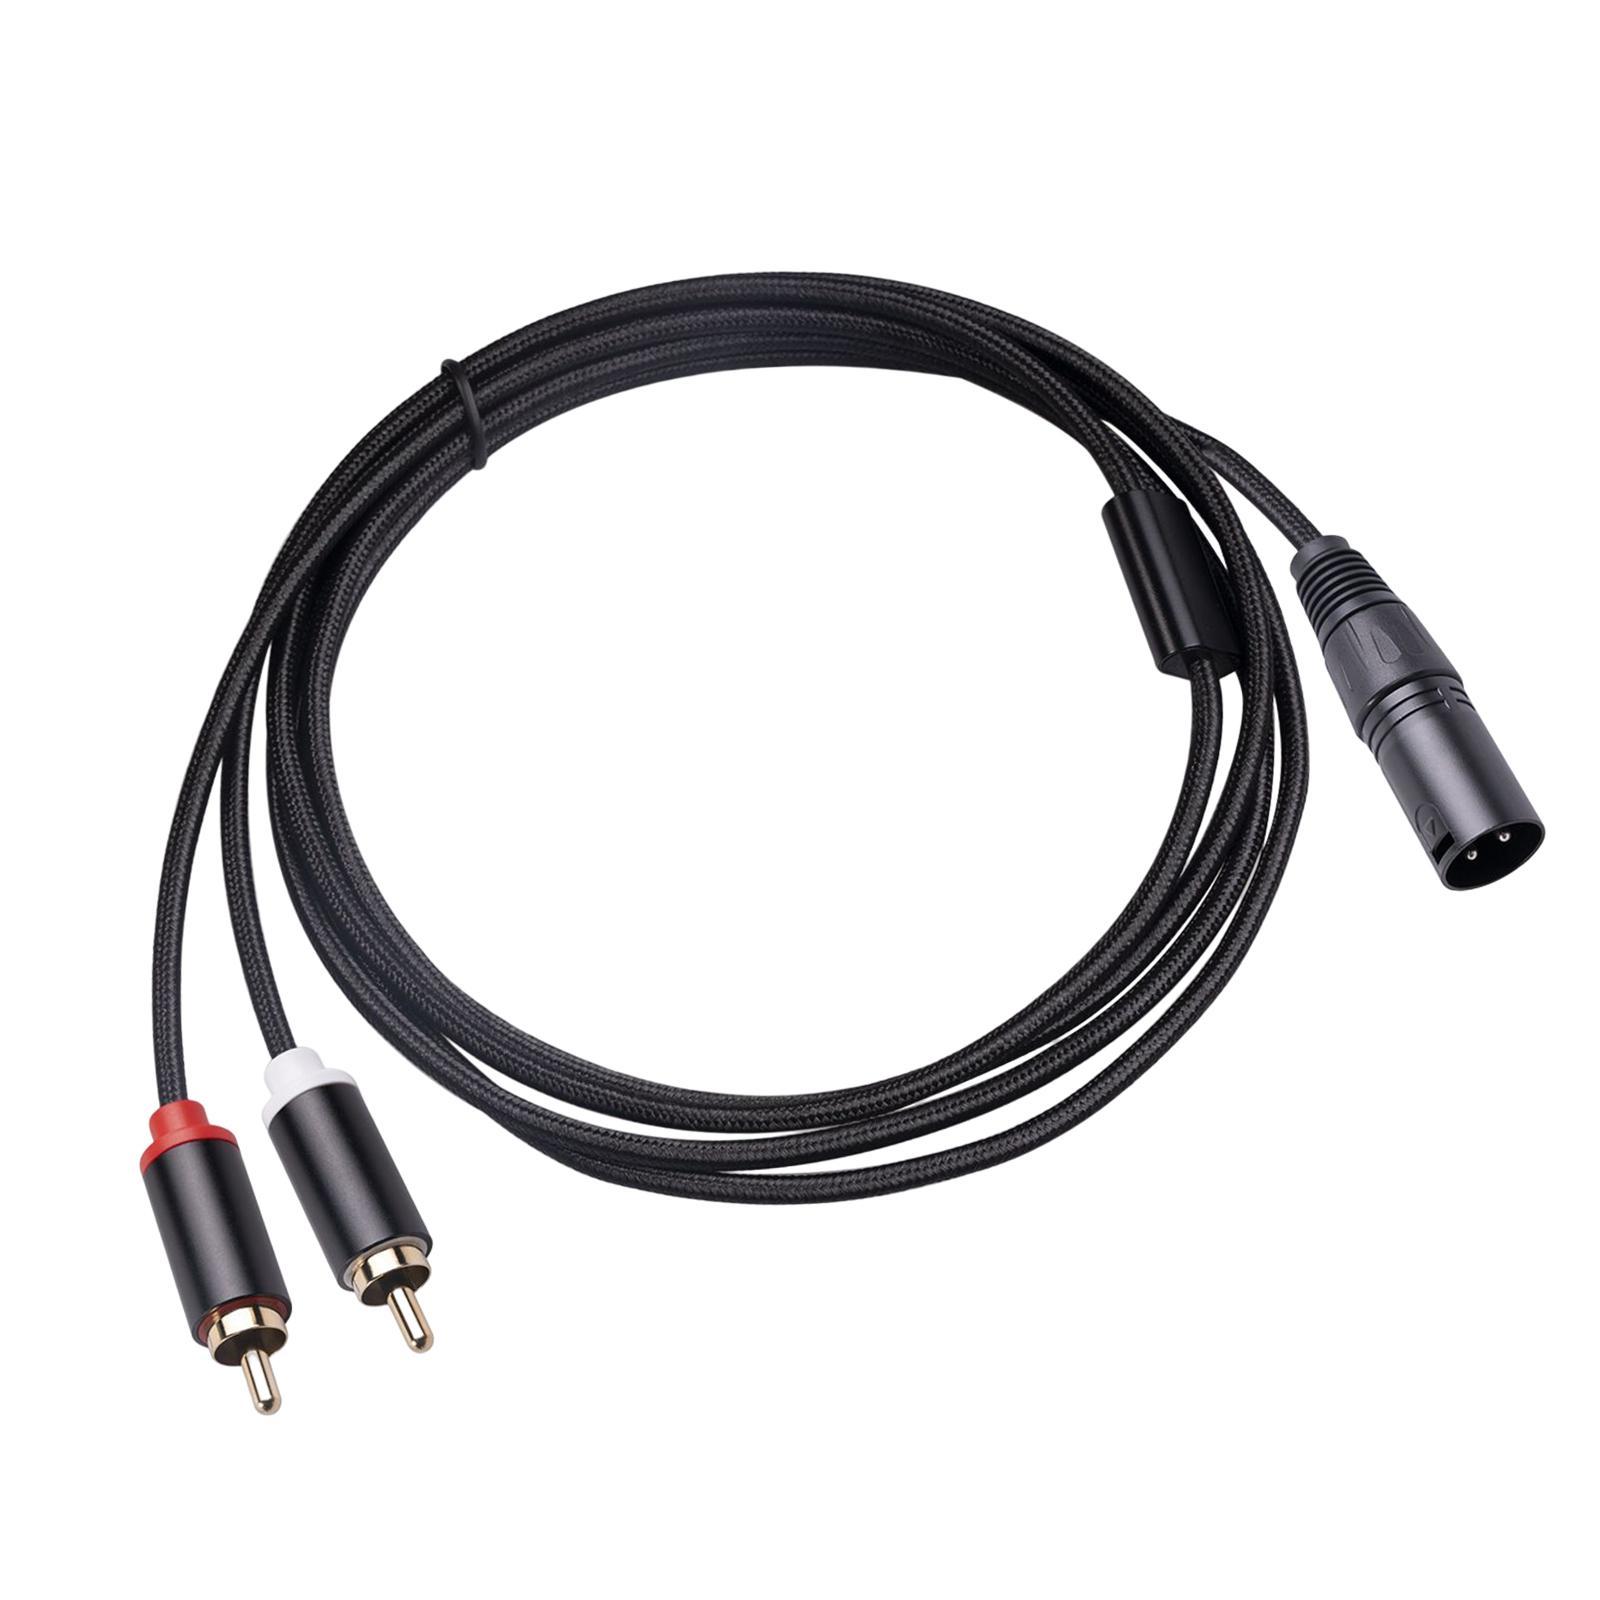 XLR to Dual Cable HiFi Stereo for Phones Mixers Home Theater Components 1m